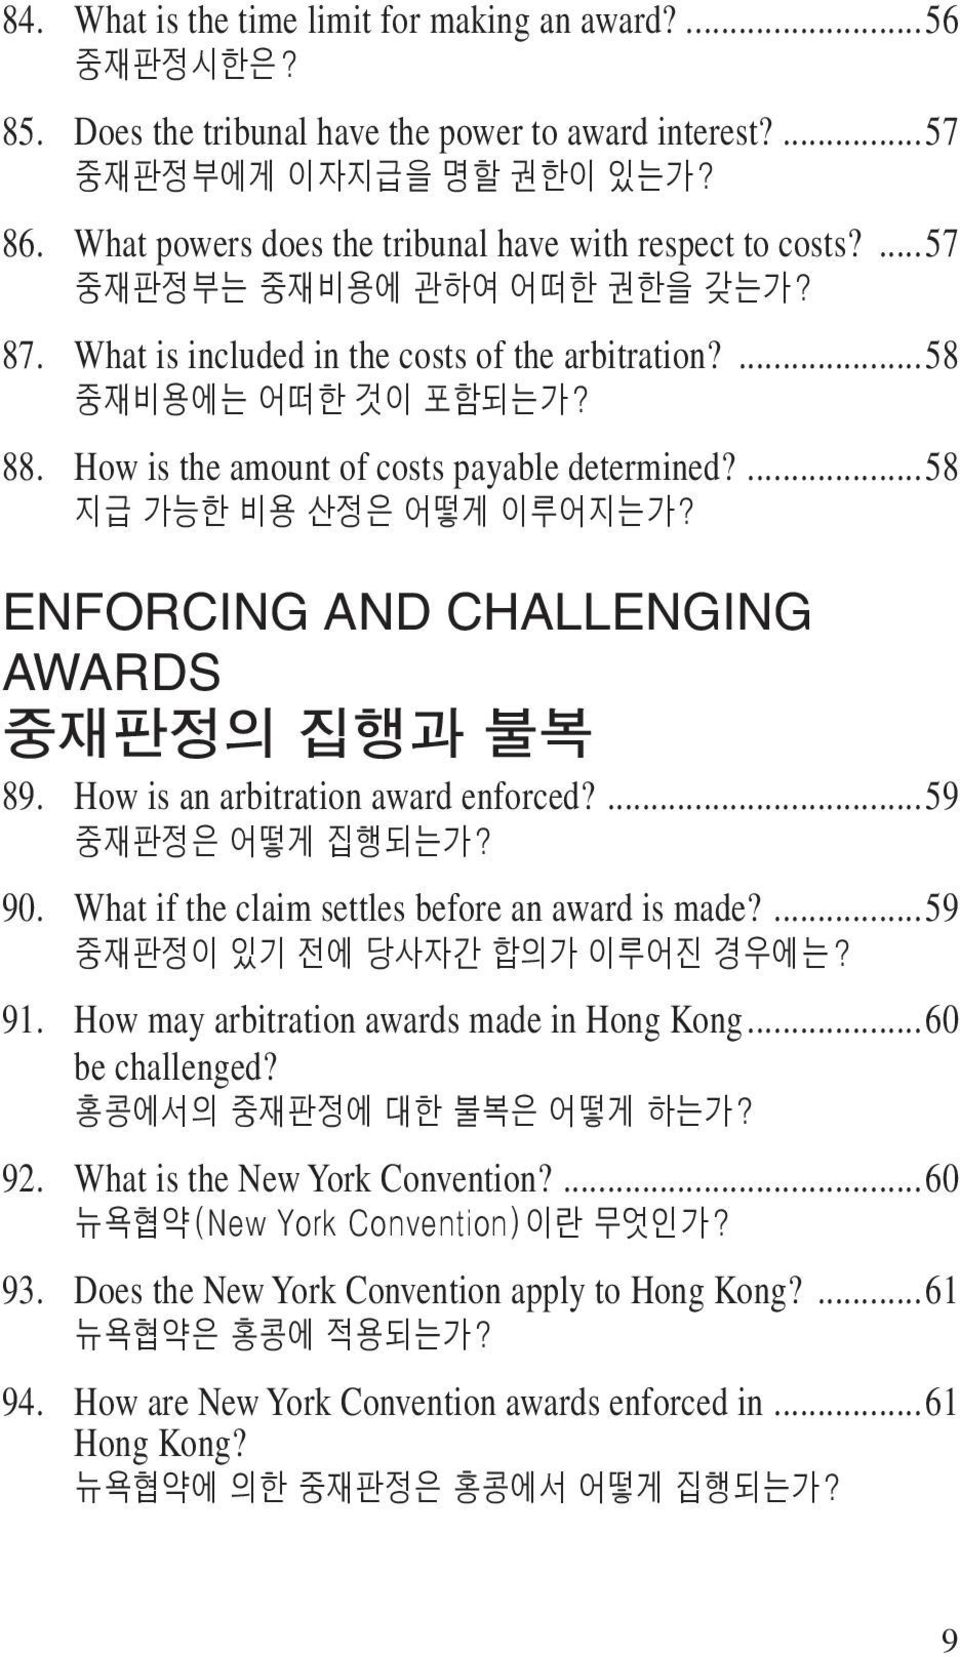 How is the amount of costs payable determined?...58 지급 가능한 비용 산정은 어떻게 이루어지는가? Enforcing and Challenging Awards 중재판정의 집행과 불복 89. How is an arbitration award enforced?...59 중재판정은 어떻게 집행되는가? 90.